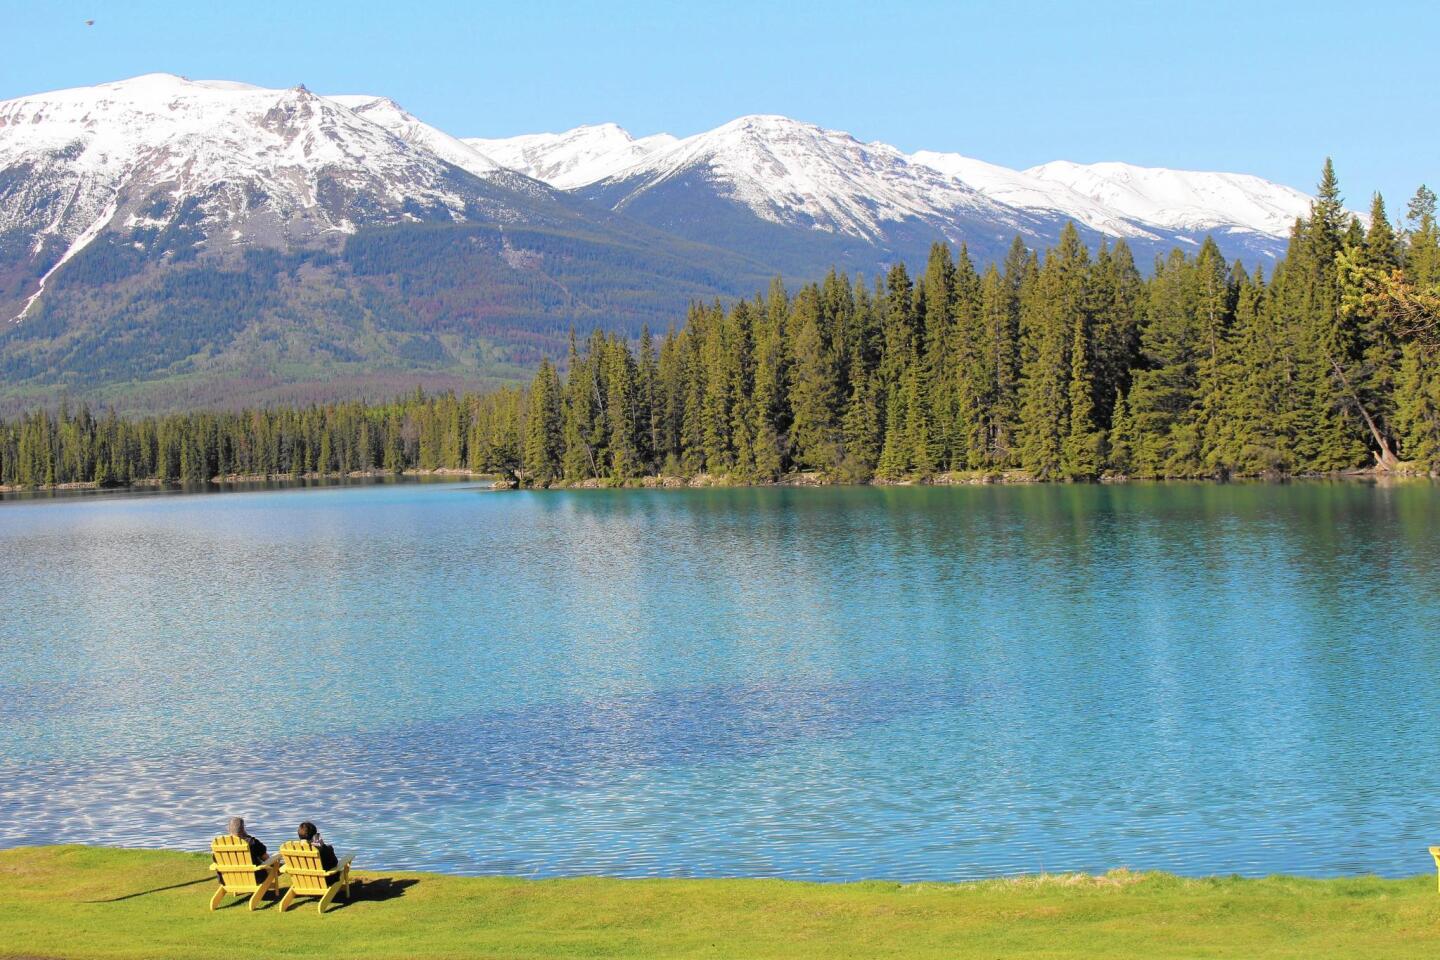 Guests on the grounds of the Fairmont Jasper Park Lodge (opened 1922) savor morning sunshine and a view of Lac Beauvert and the Canadian Rockies.